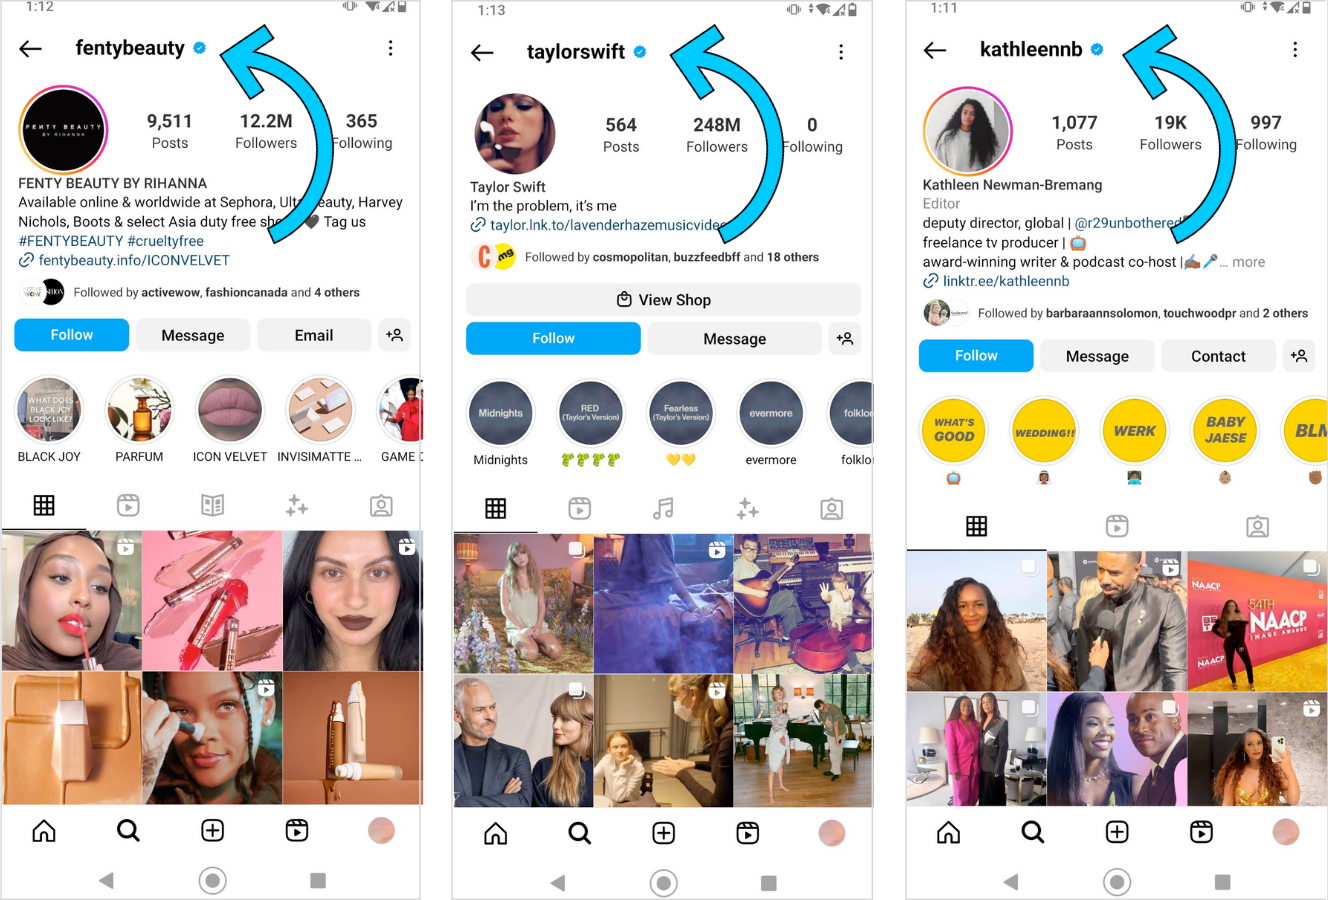 How to Get Verified on Instagram in 2023